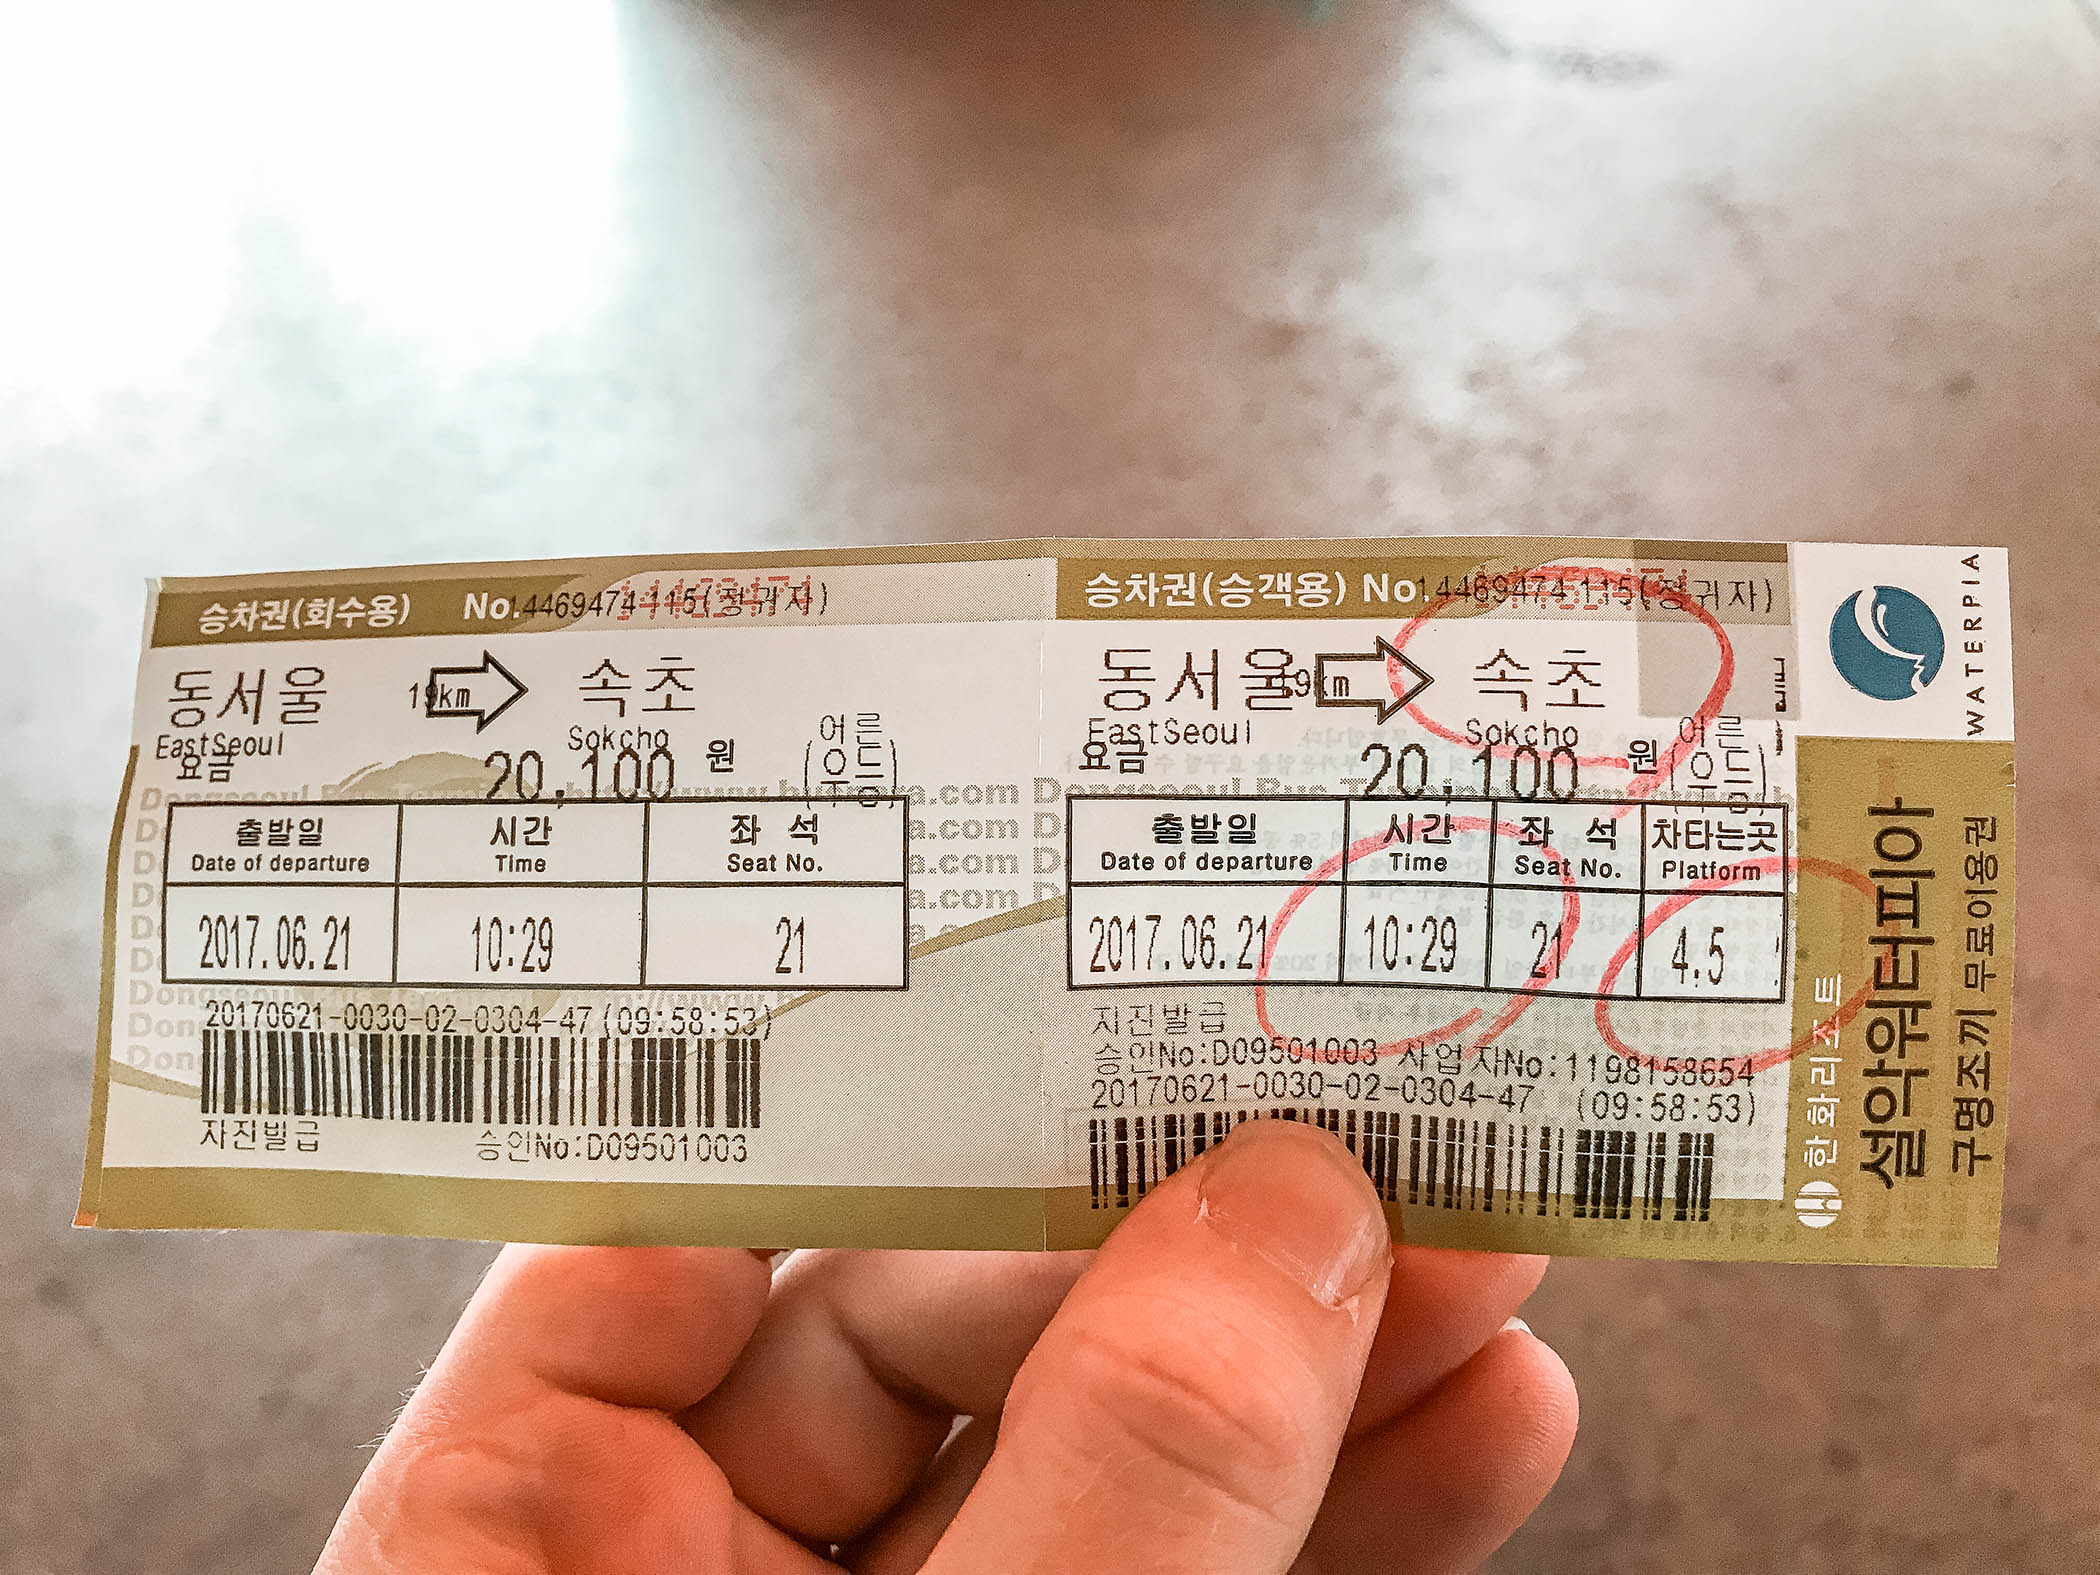 Bus ticket for journey between Seoul and Sokcho